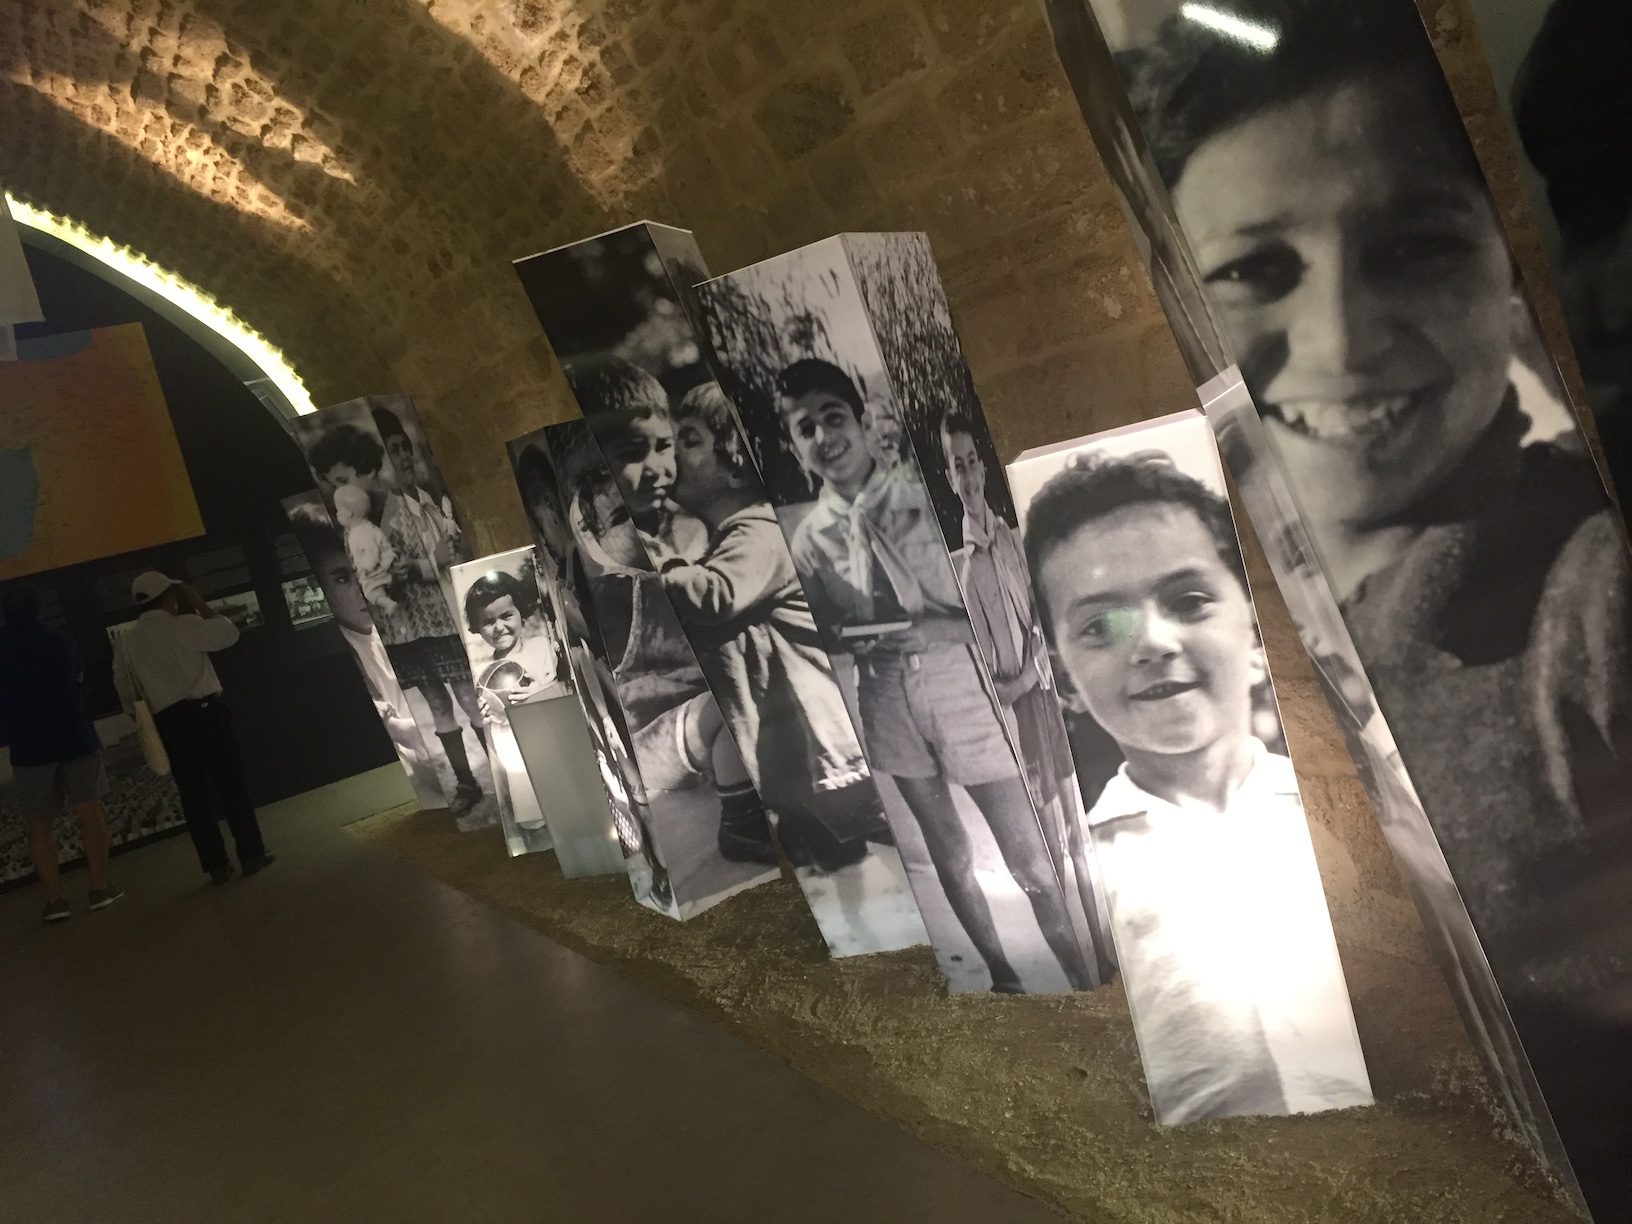 Black and white illuminated photos of smiling children in a dark exhibition.